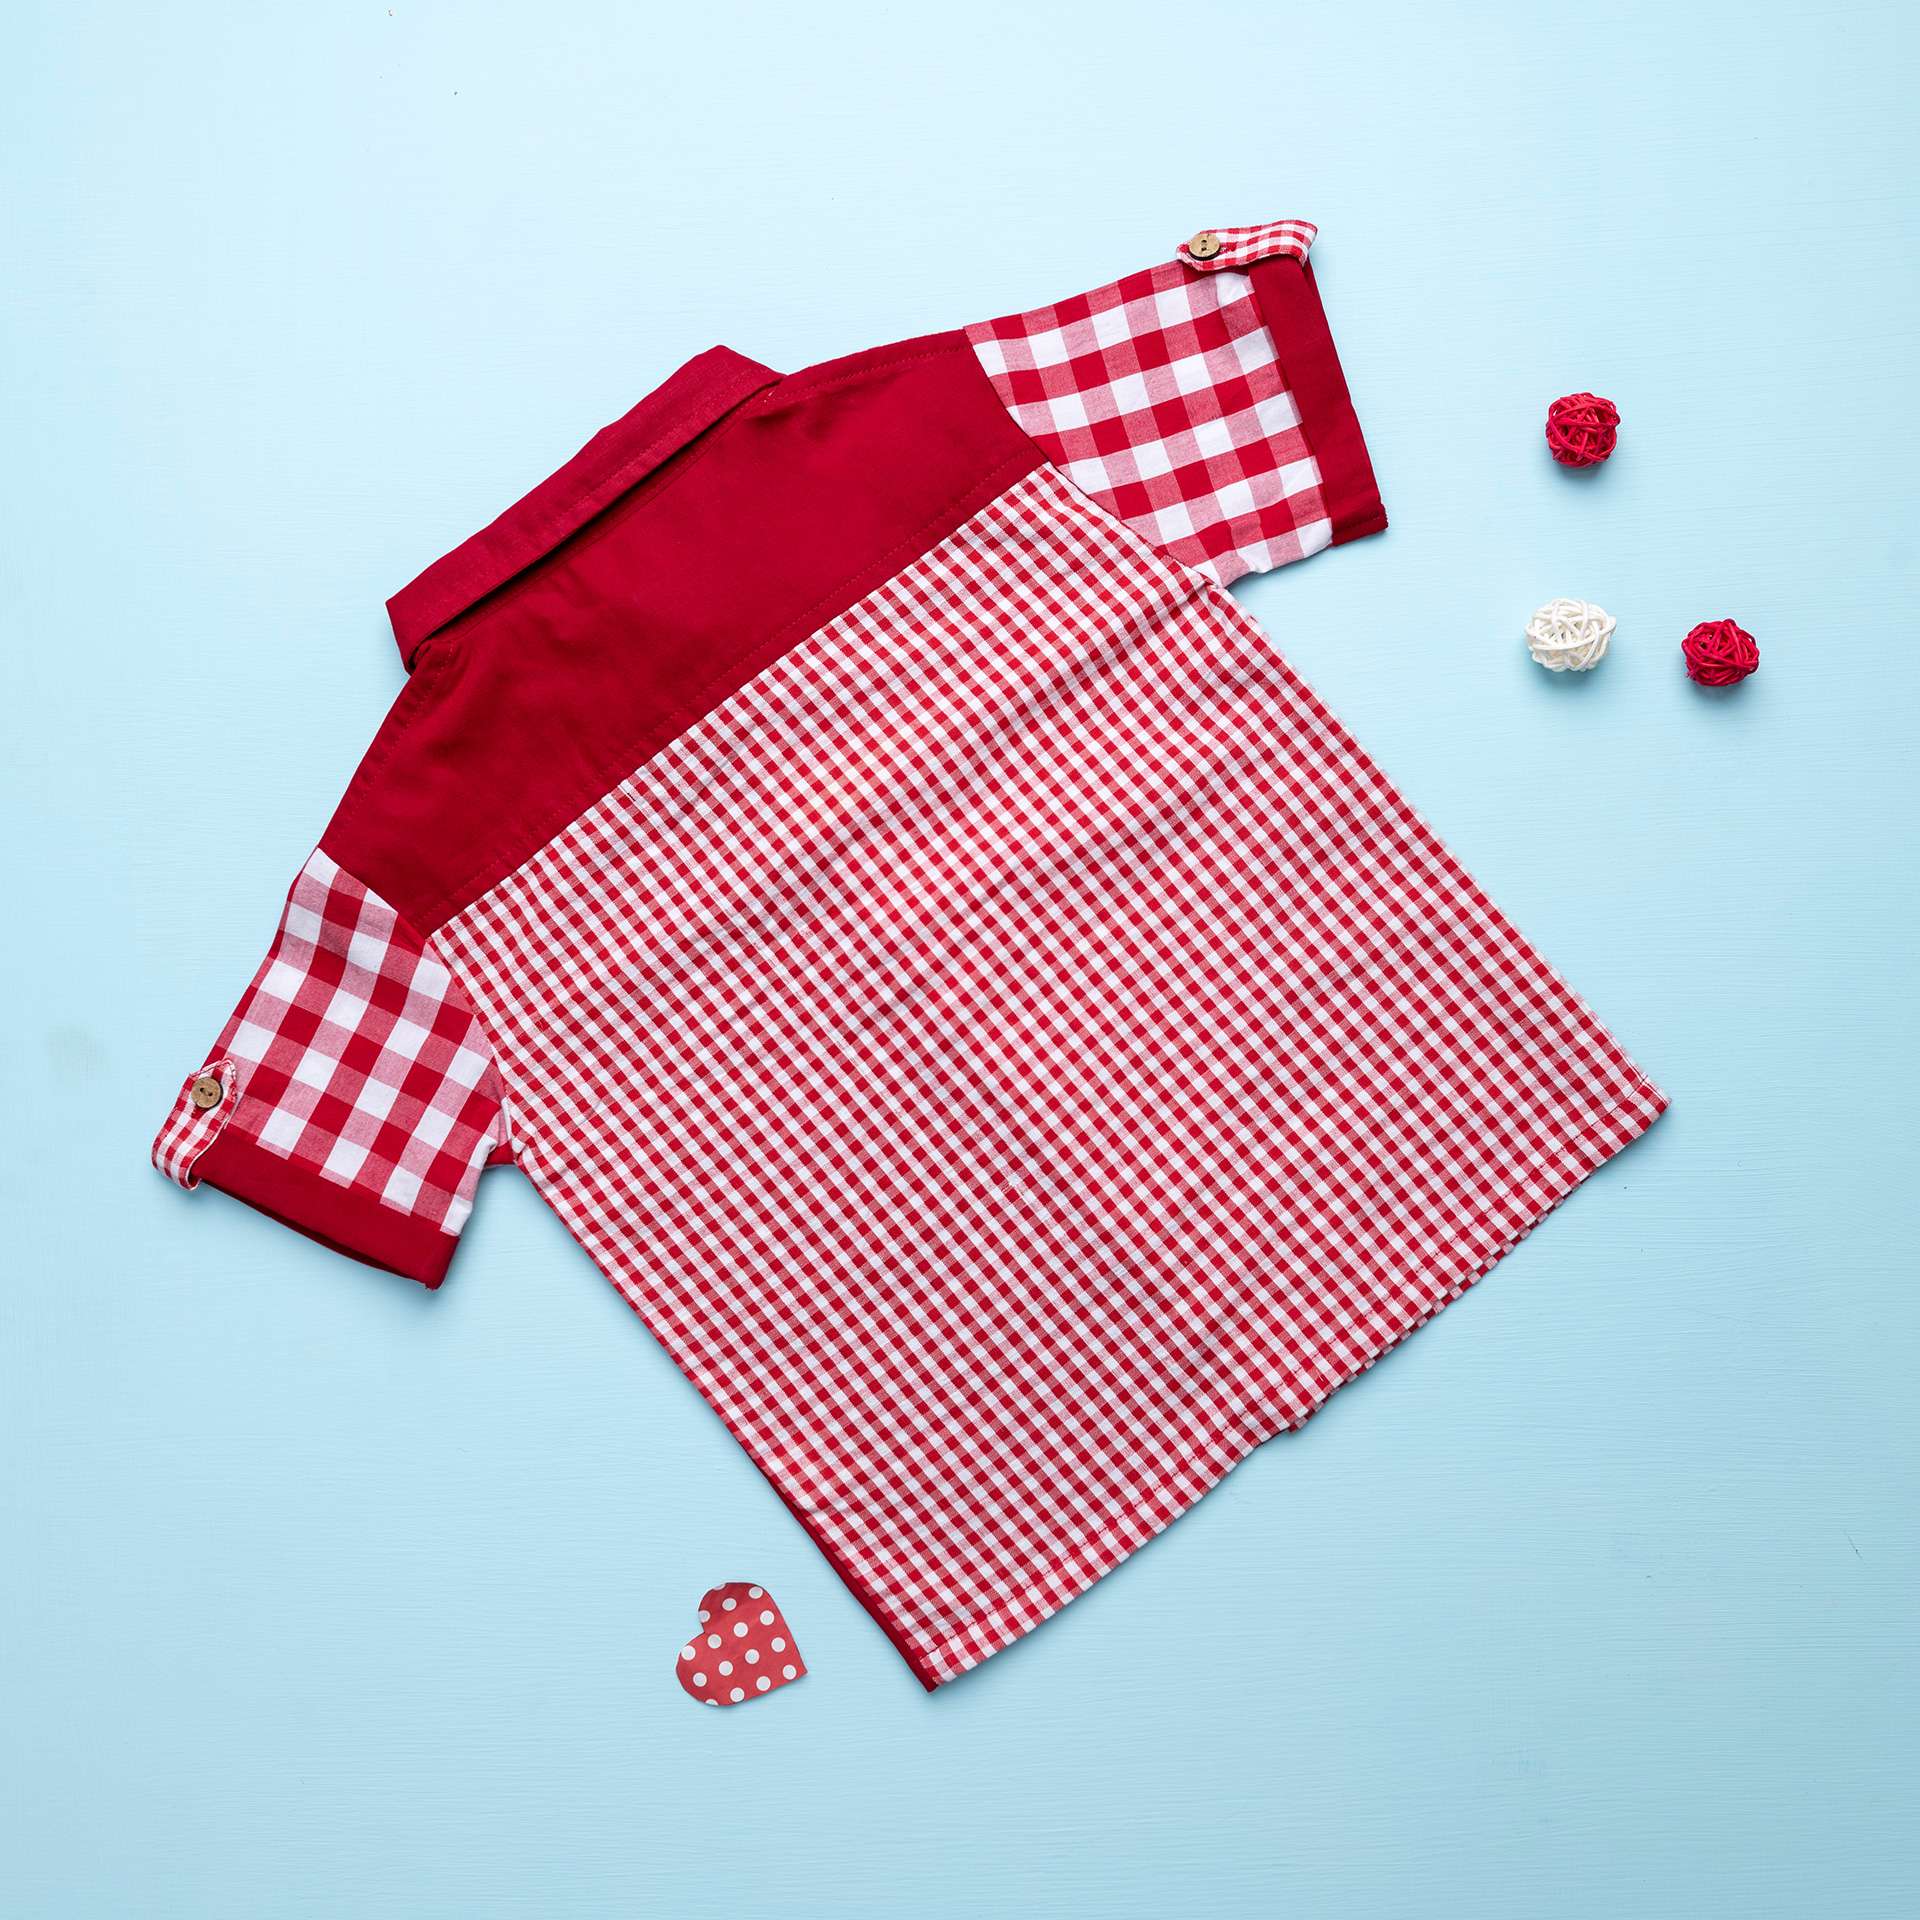 Flatlay of rear side of the red checked shirt made from a patchwork of big and micro red gingham and solid red voile